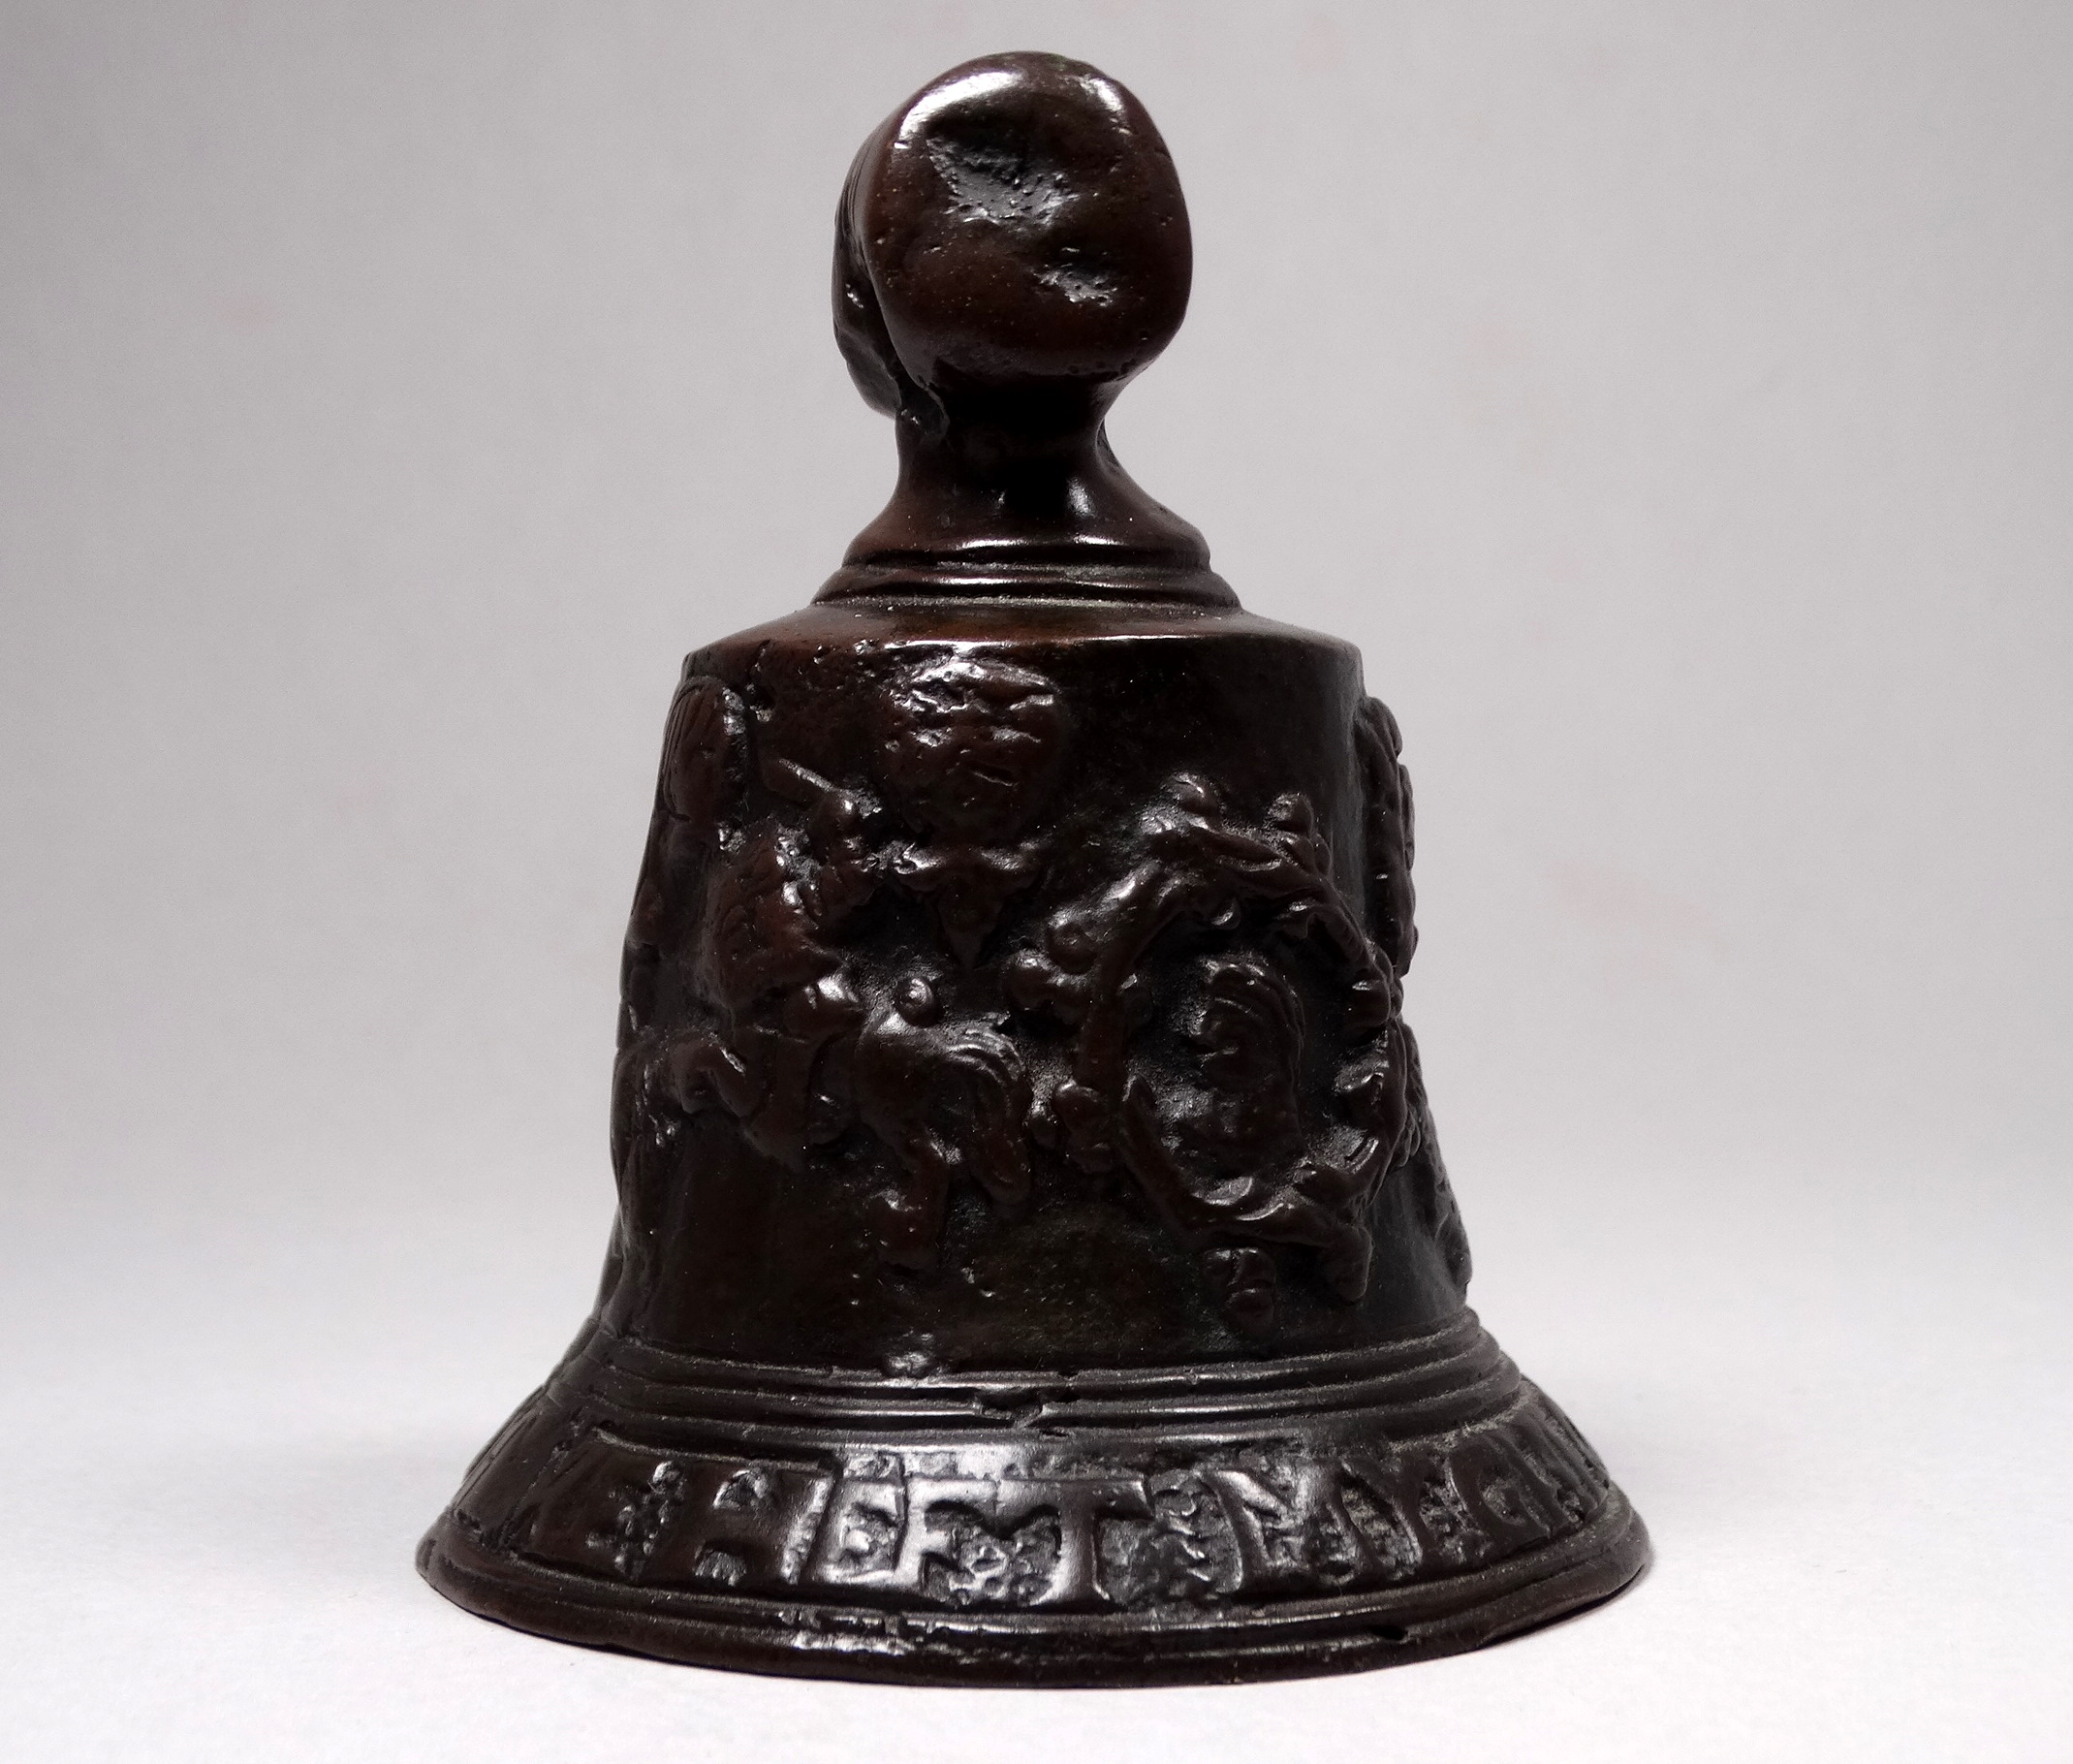 After the antique, a 19th century cast bronze bell - with grotesque mask, height 10cm. - Image 5 of 6